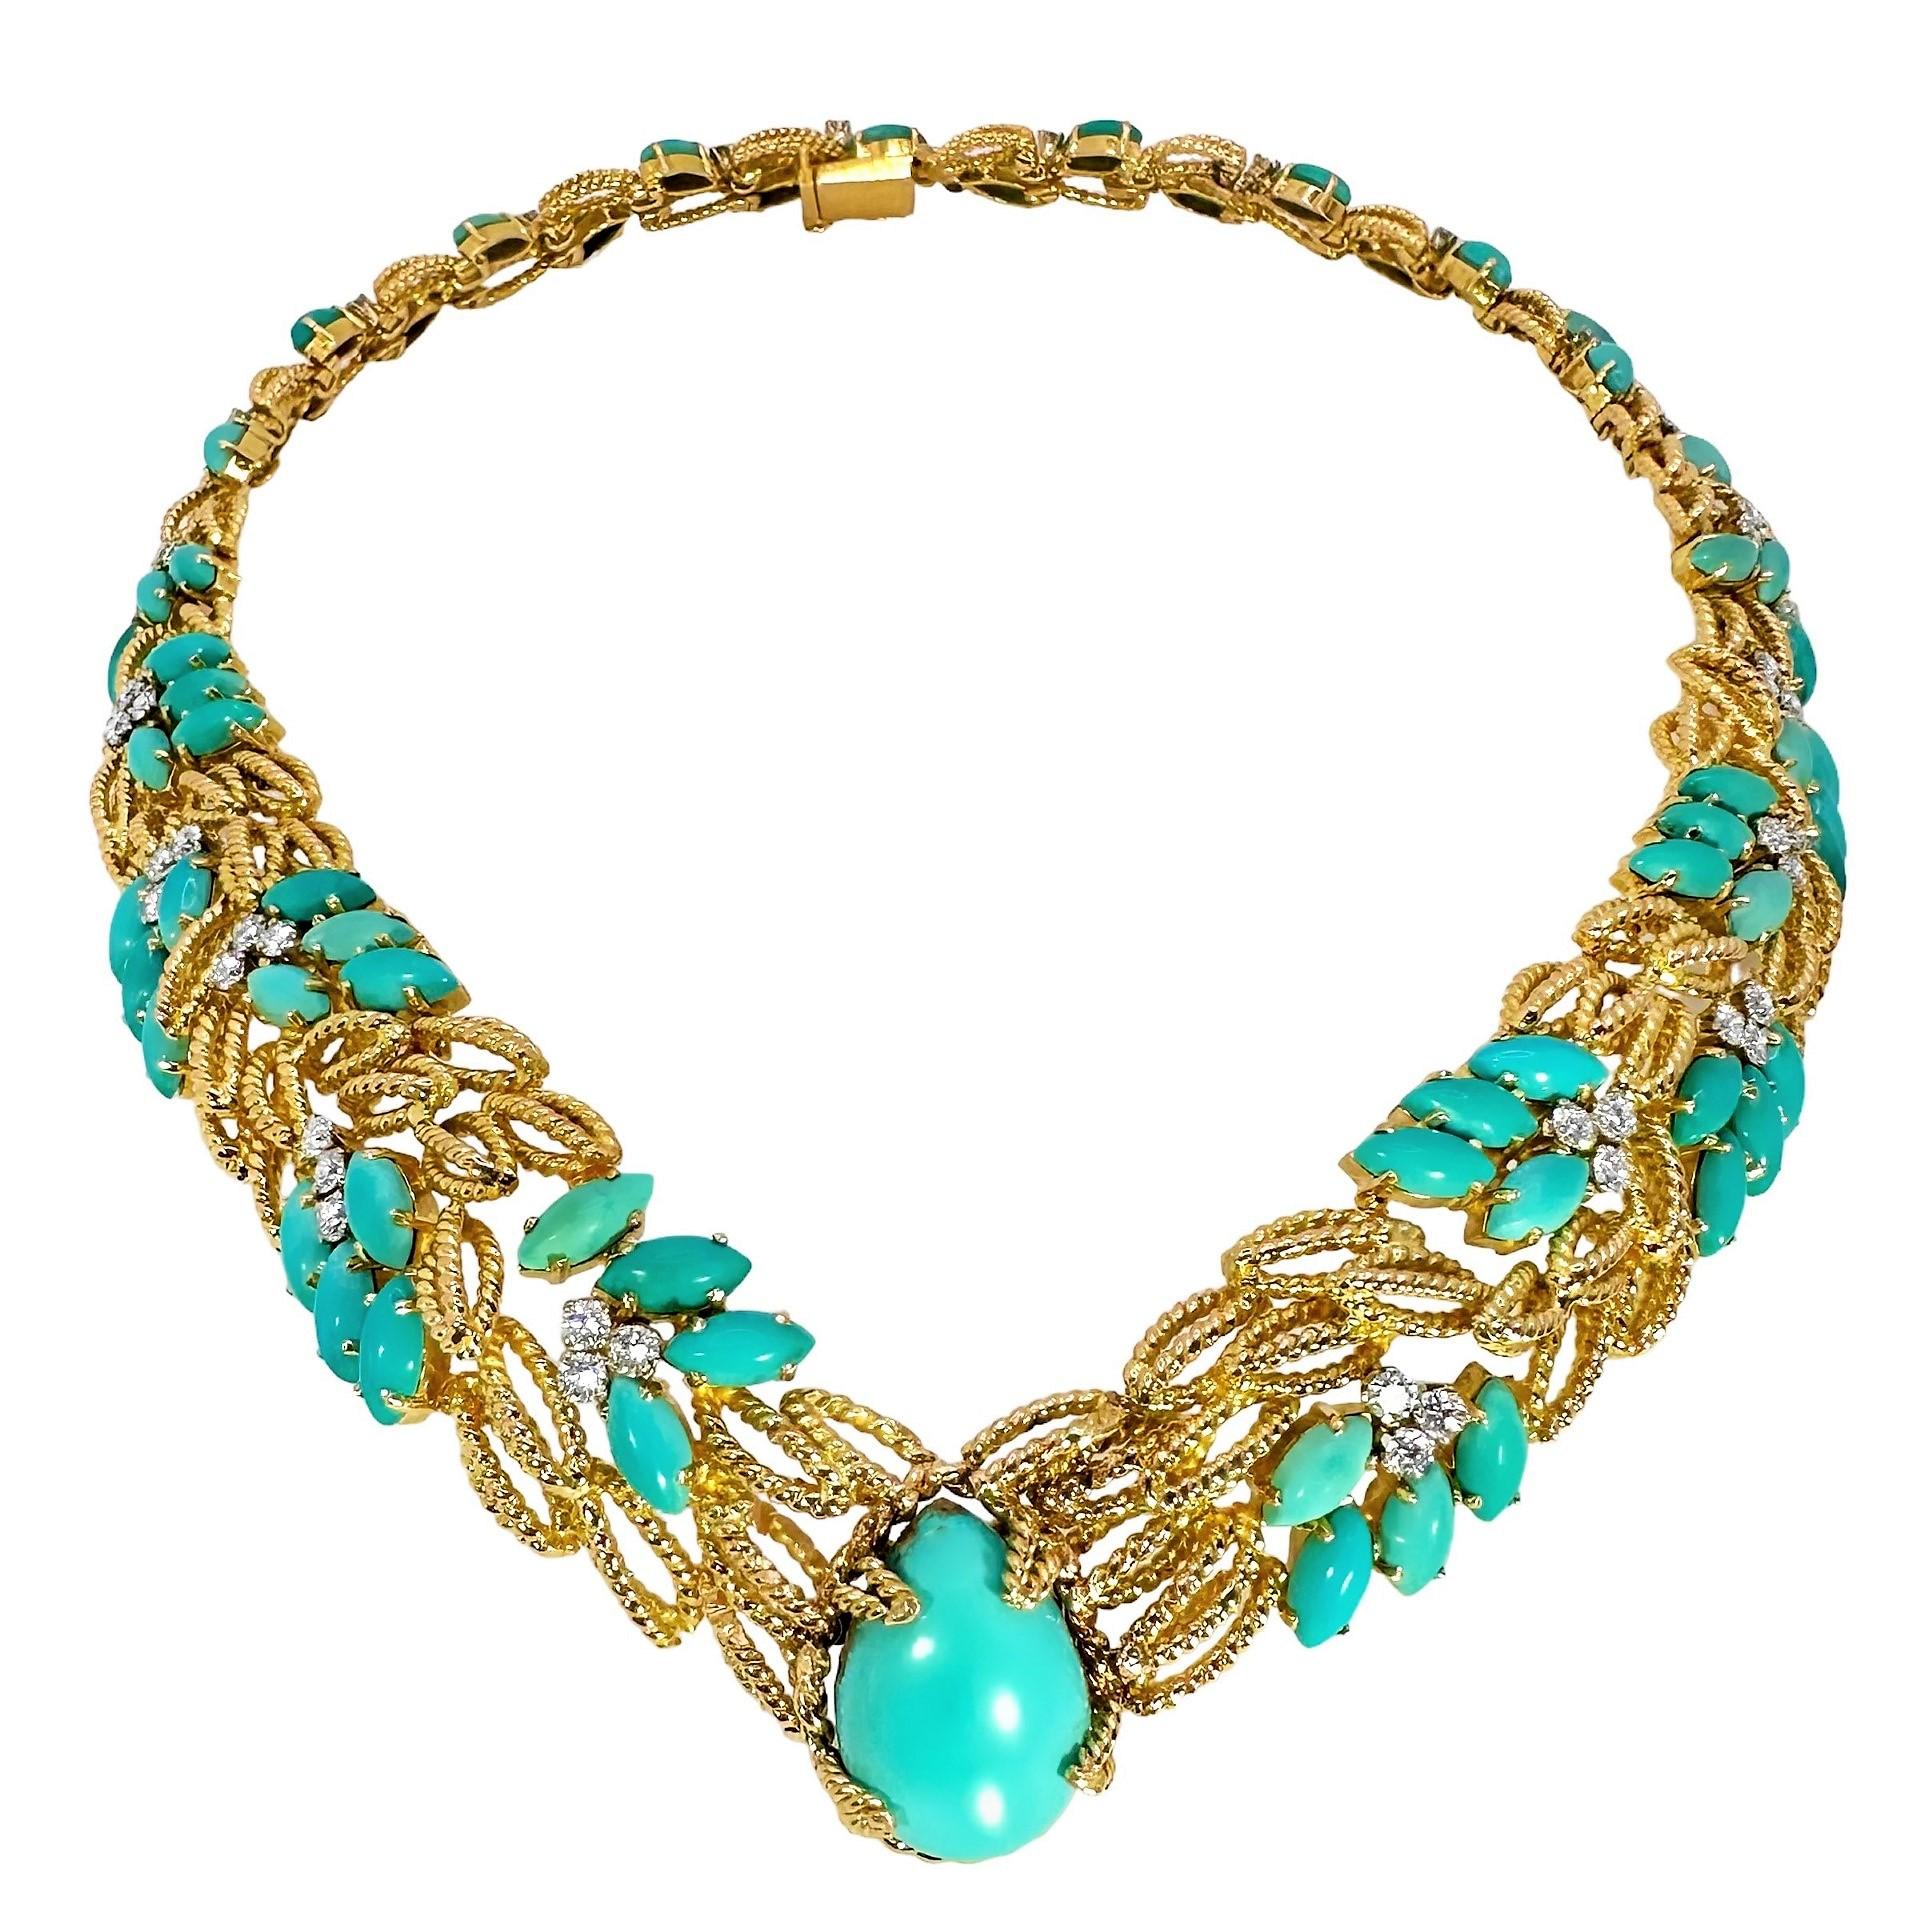 This lovely and feminine, Mid-20th Century 18k yellow gold, hand crafted cocktail necklace is positively characteristic of the most interesting and creative items from the period. A large Persian turquoise cabochon is the centerpiece and is flanked